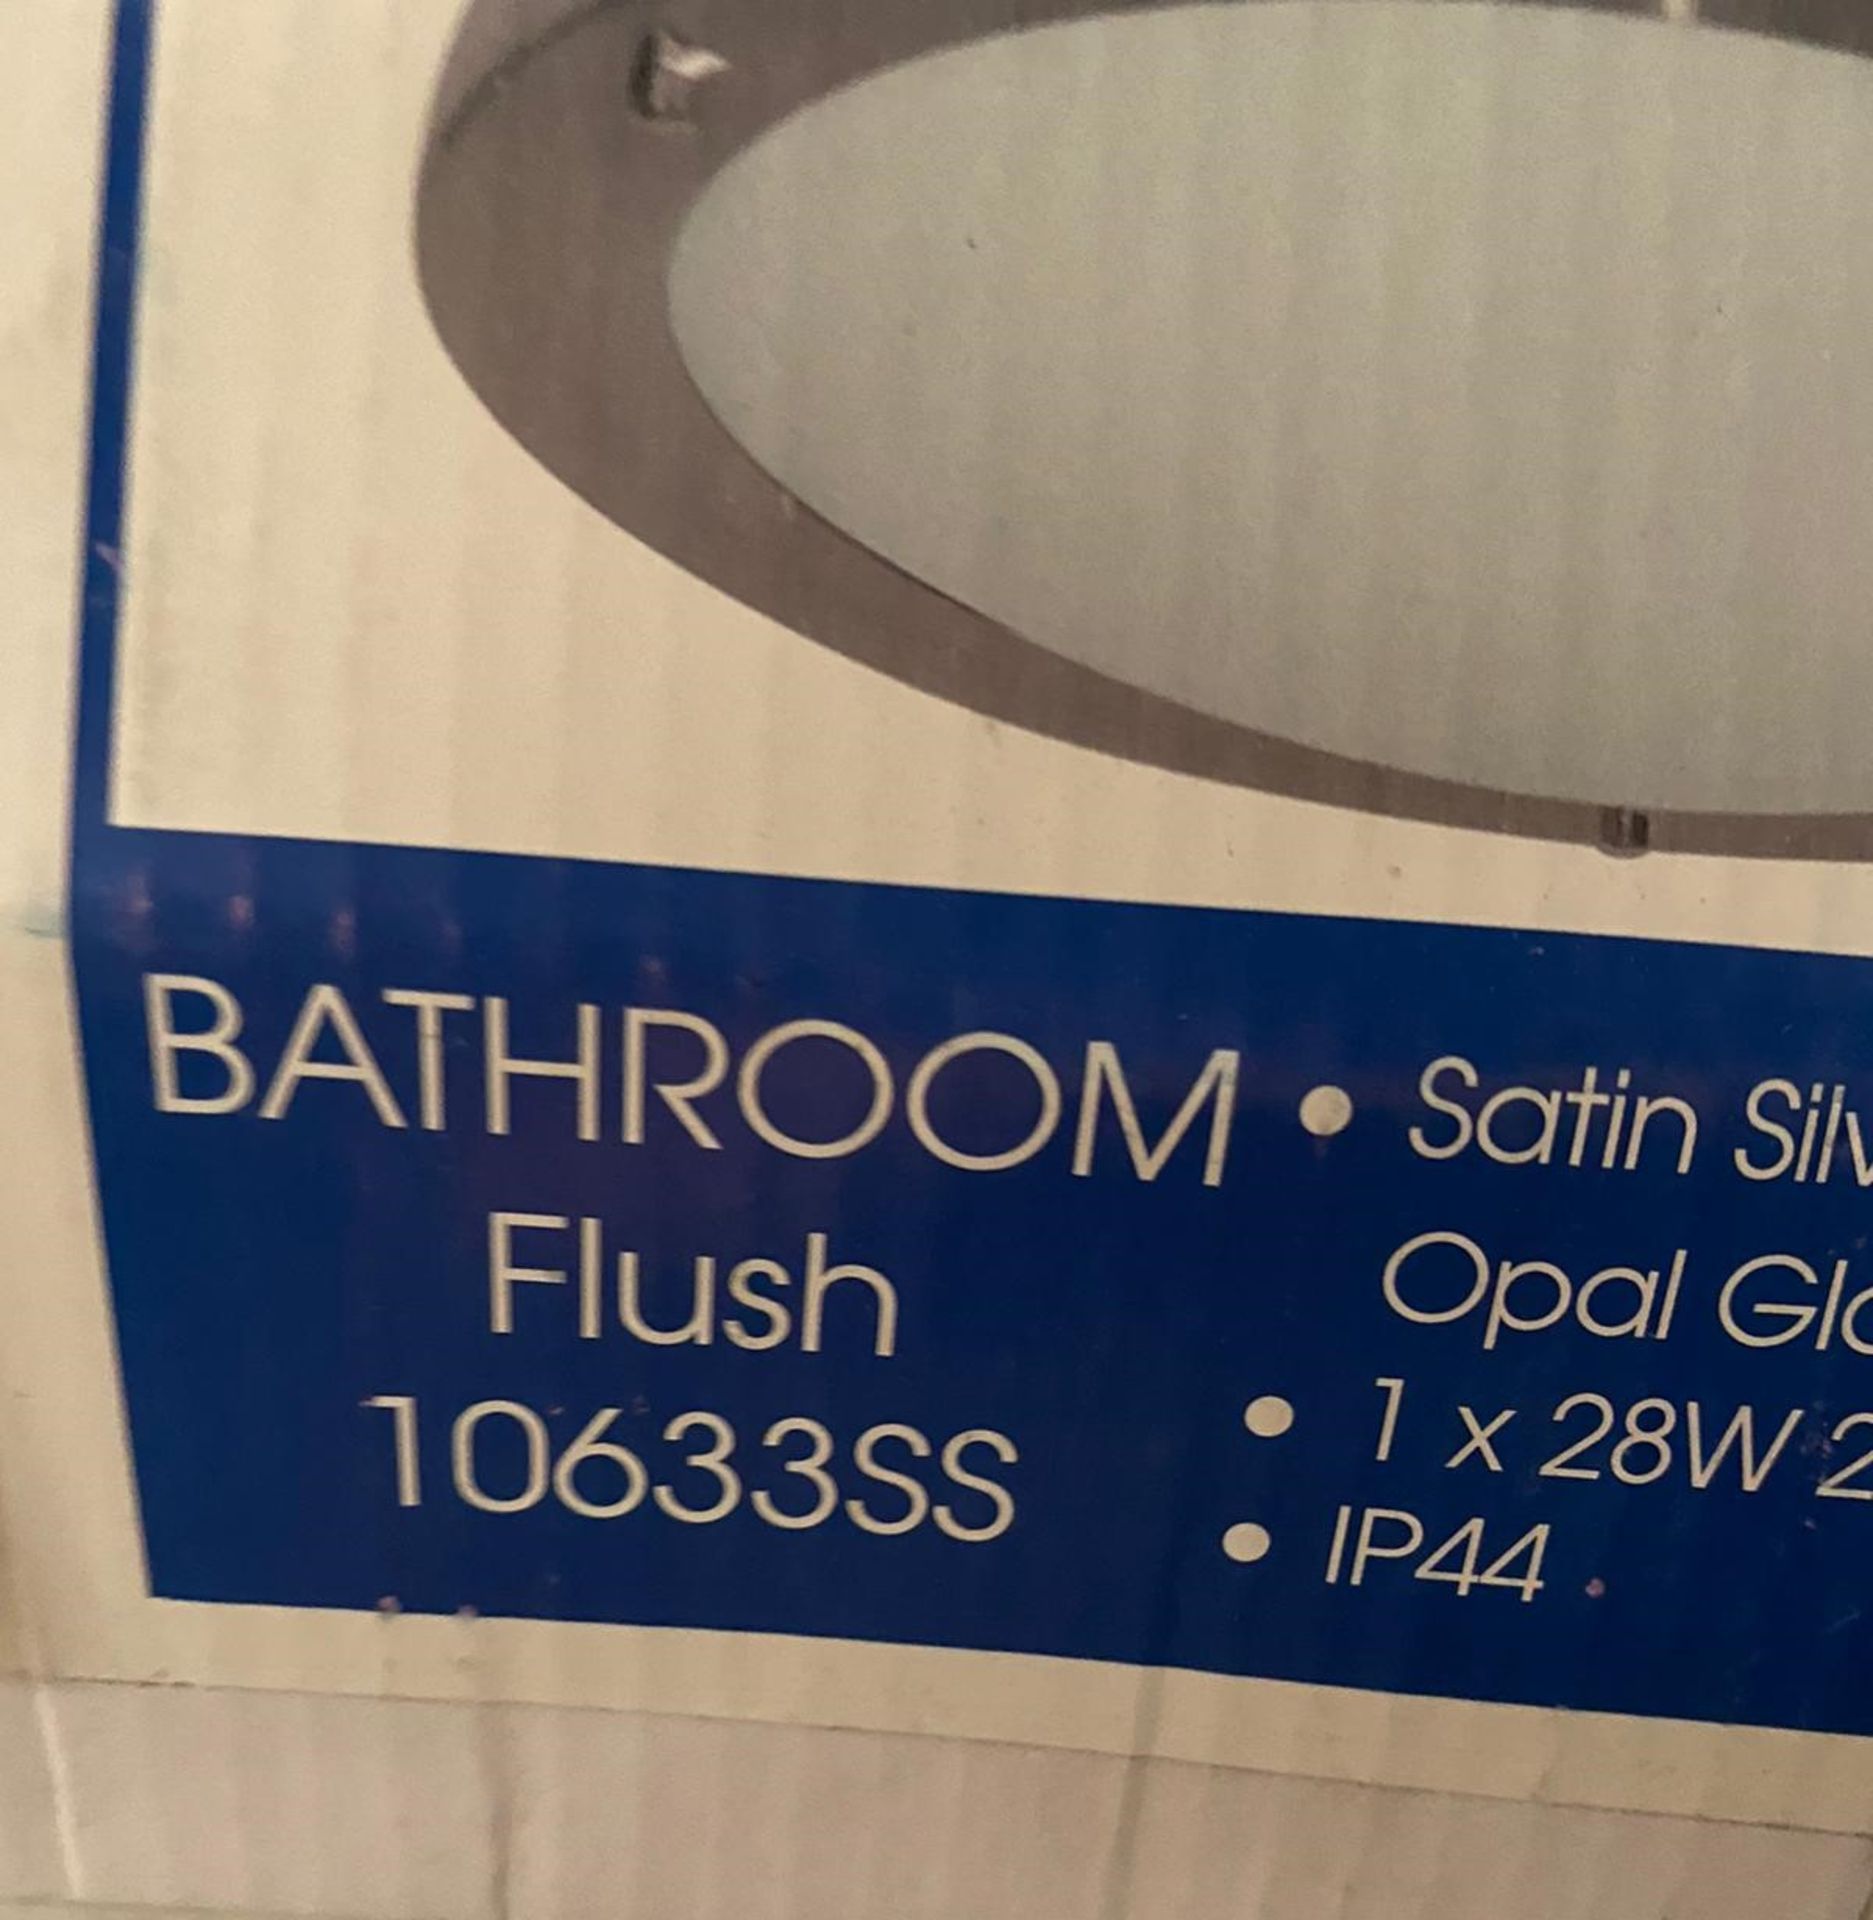 1 x Searchlight Bathroom Flush in a satin silver finish - Ref: 10632SS - New and Boxed - RRP: £60.00 - Image 4 of 4